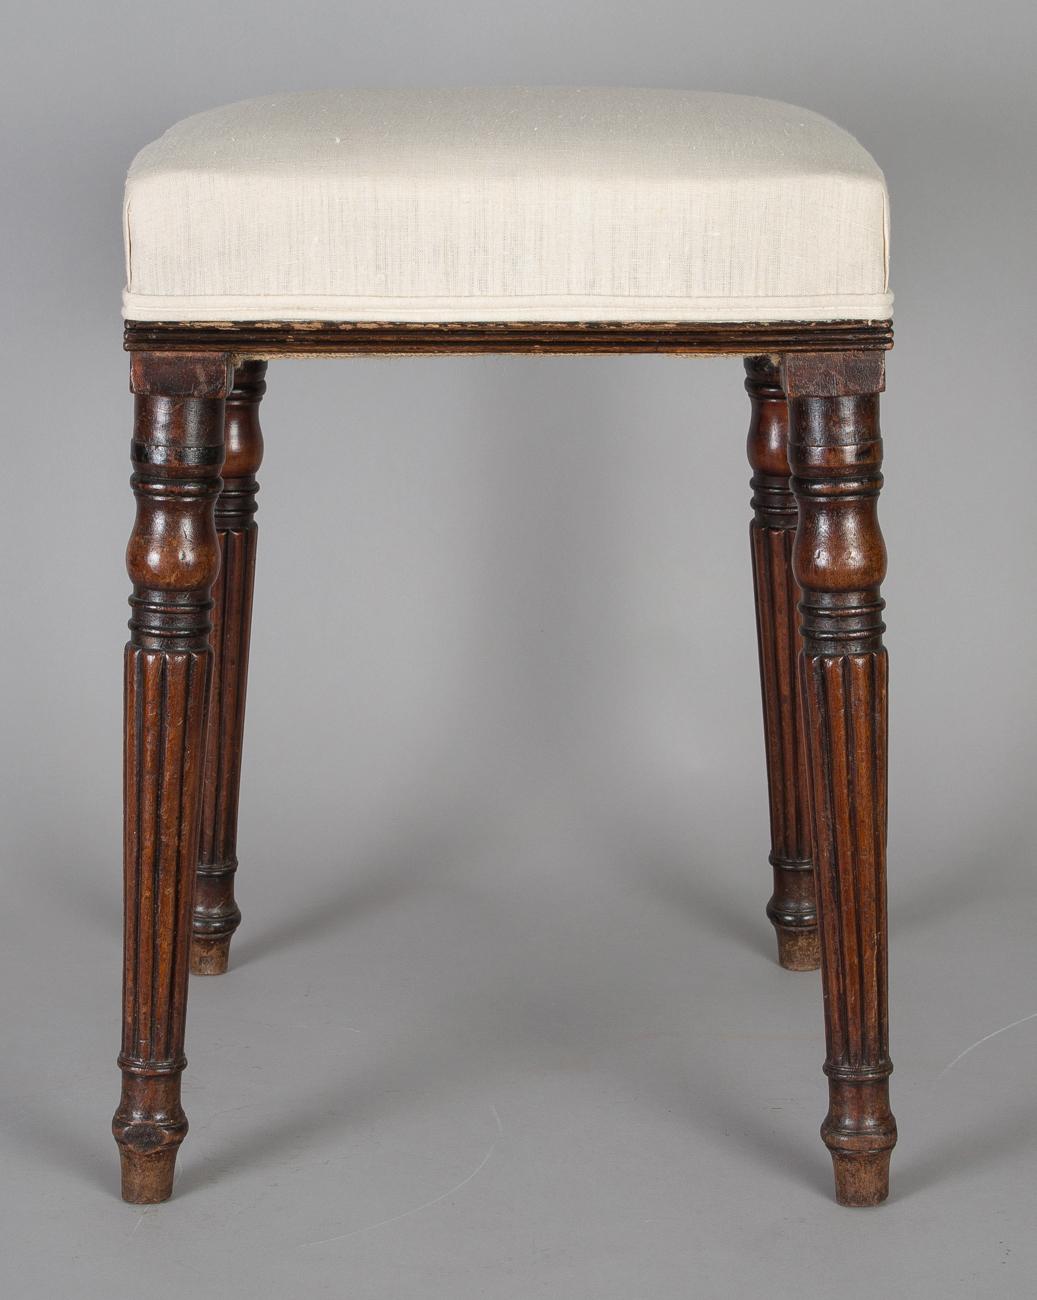 Carved Antique English Regency Mahogany Stool For Sale